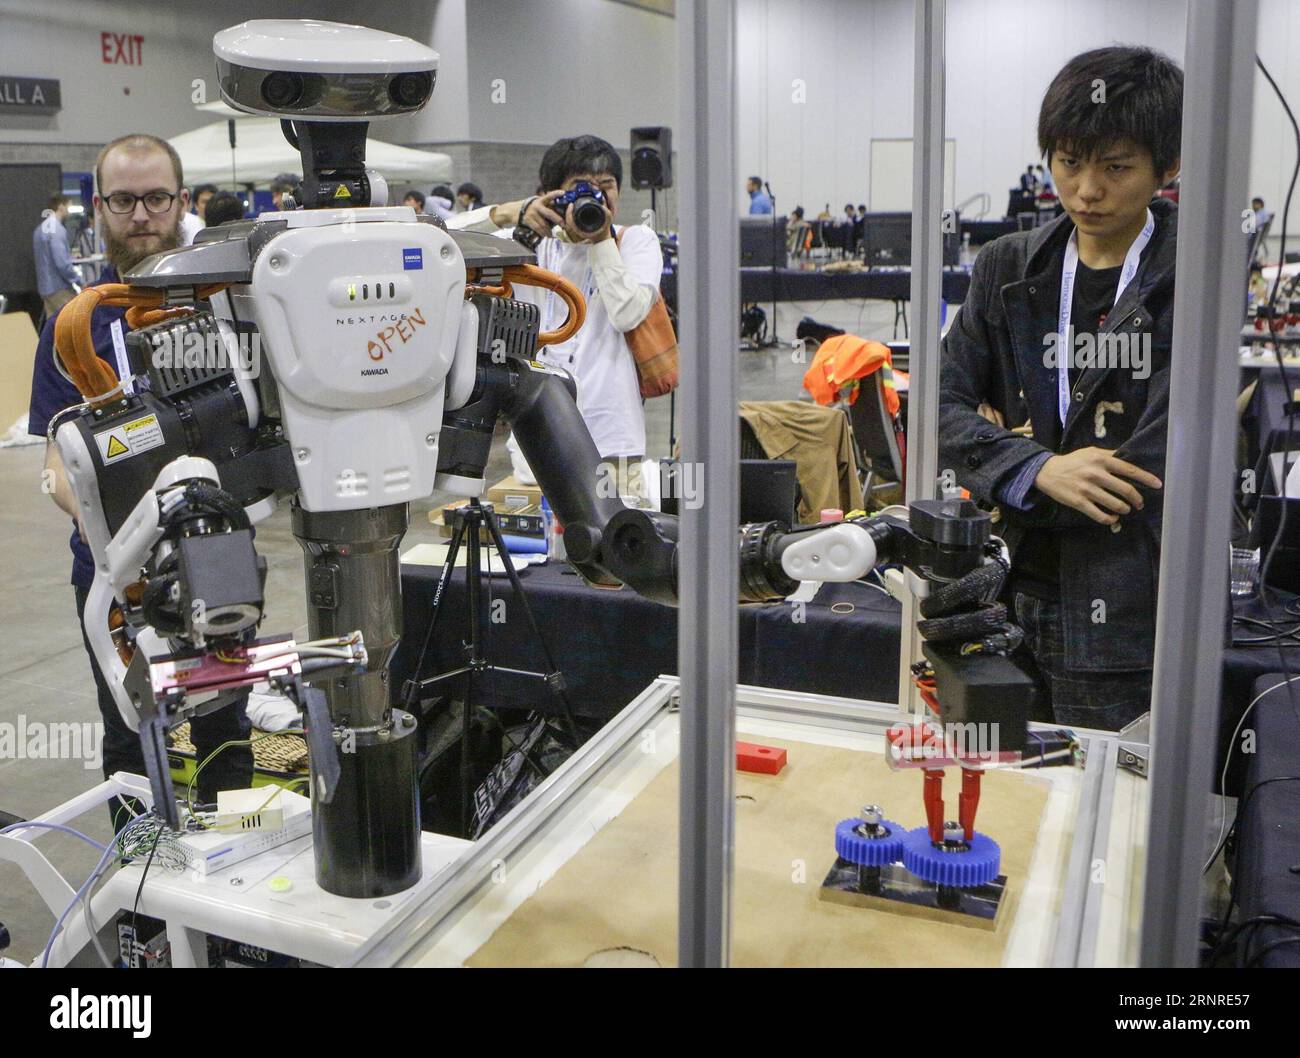 (170927) -- VANCOUVER, Sept. 27, 2017 -- People watch the robotic hands, grasping and manipulation competition at the 30th International Conference on Intelligent Robots and Systems in Vancouver, Canada, Sept. 26, 2017. The five-day conference themed Friendly People, Friendly Robots kicked off on Tuesday, with 54 companies showcasing their latest robotic technology. ) (yk) CANADA-VANCOUVER-ROBOT CONFERENCE Liangxsen PUBLICATIONxNOTxINxCHN Stock Photo